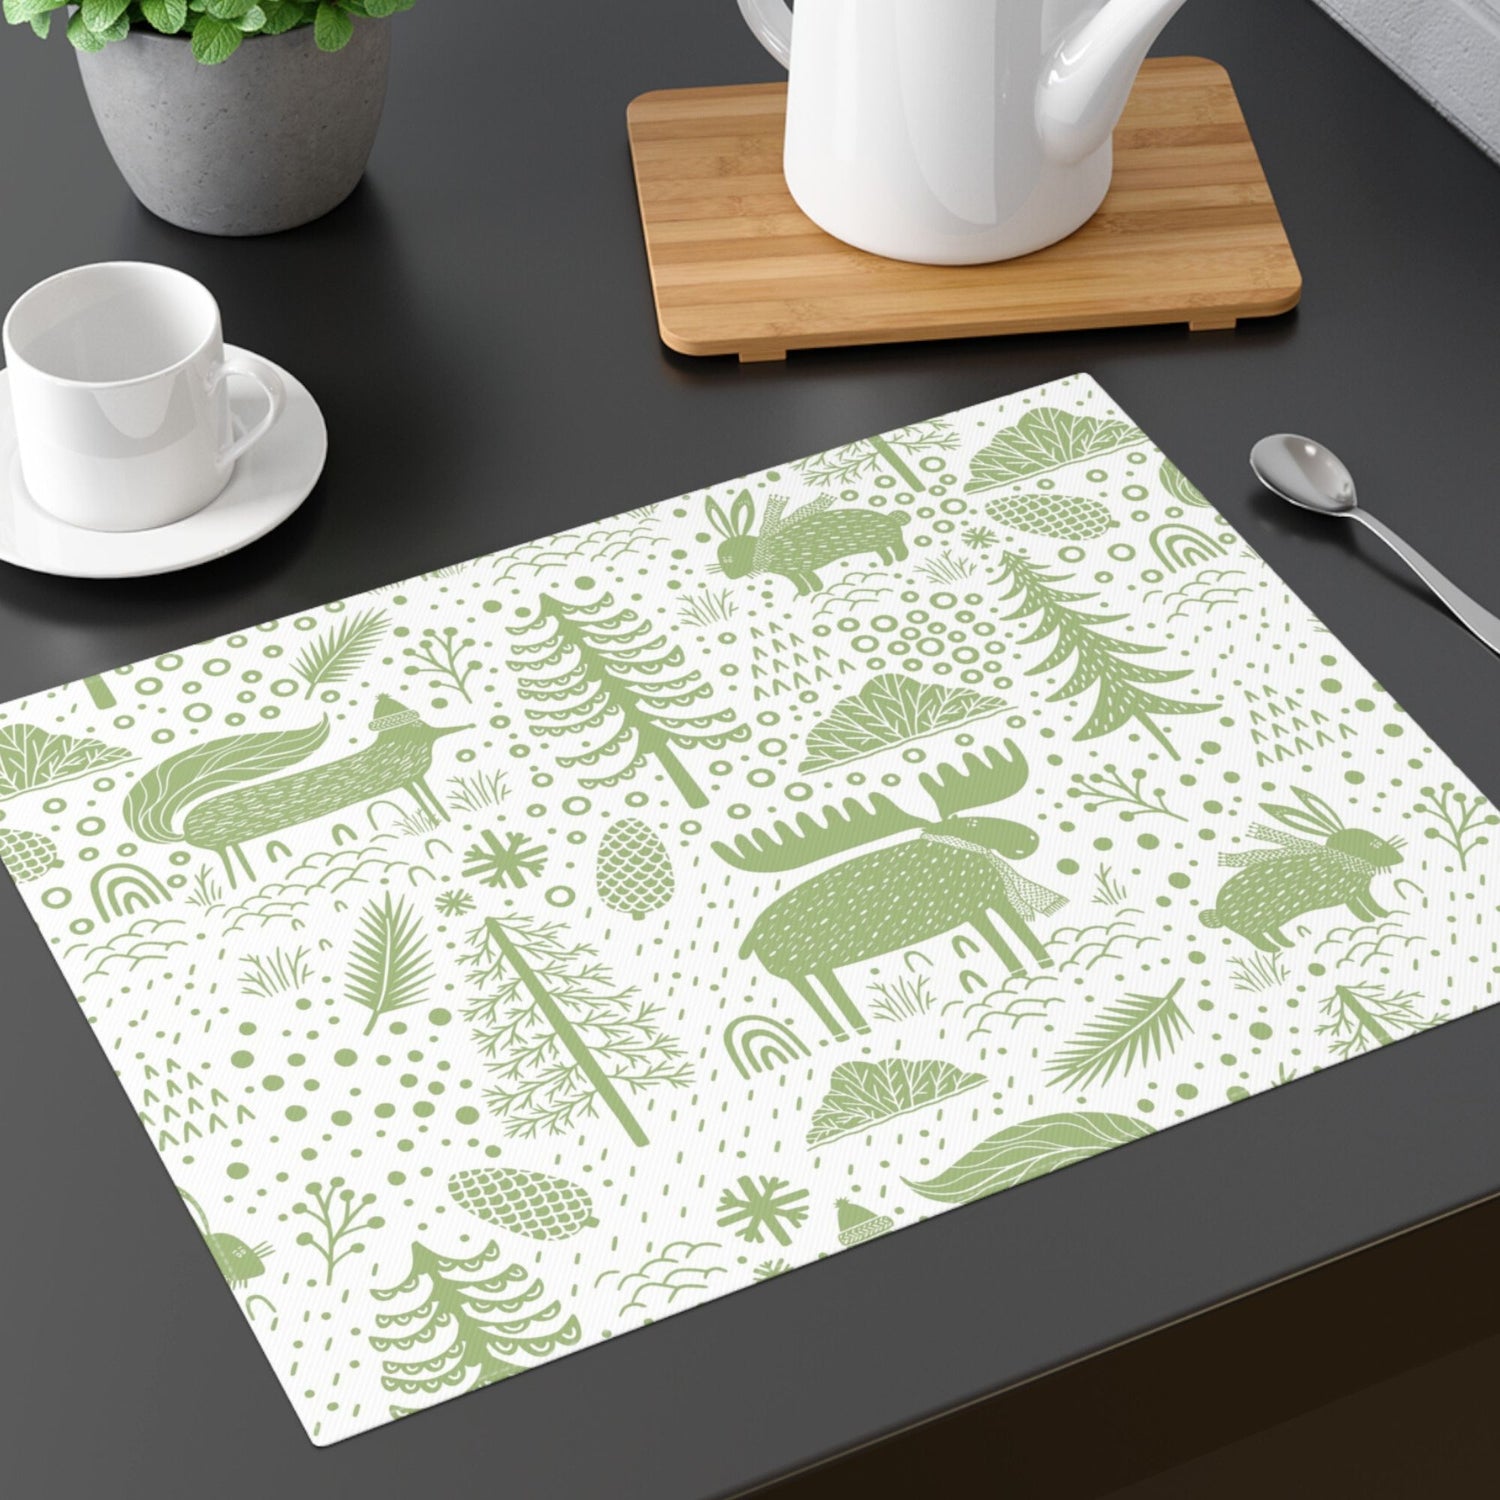 a white table placemat featuring a green Scandinavian-inspired pattern of animals, trees, and foliage. 